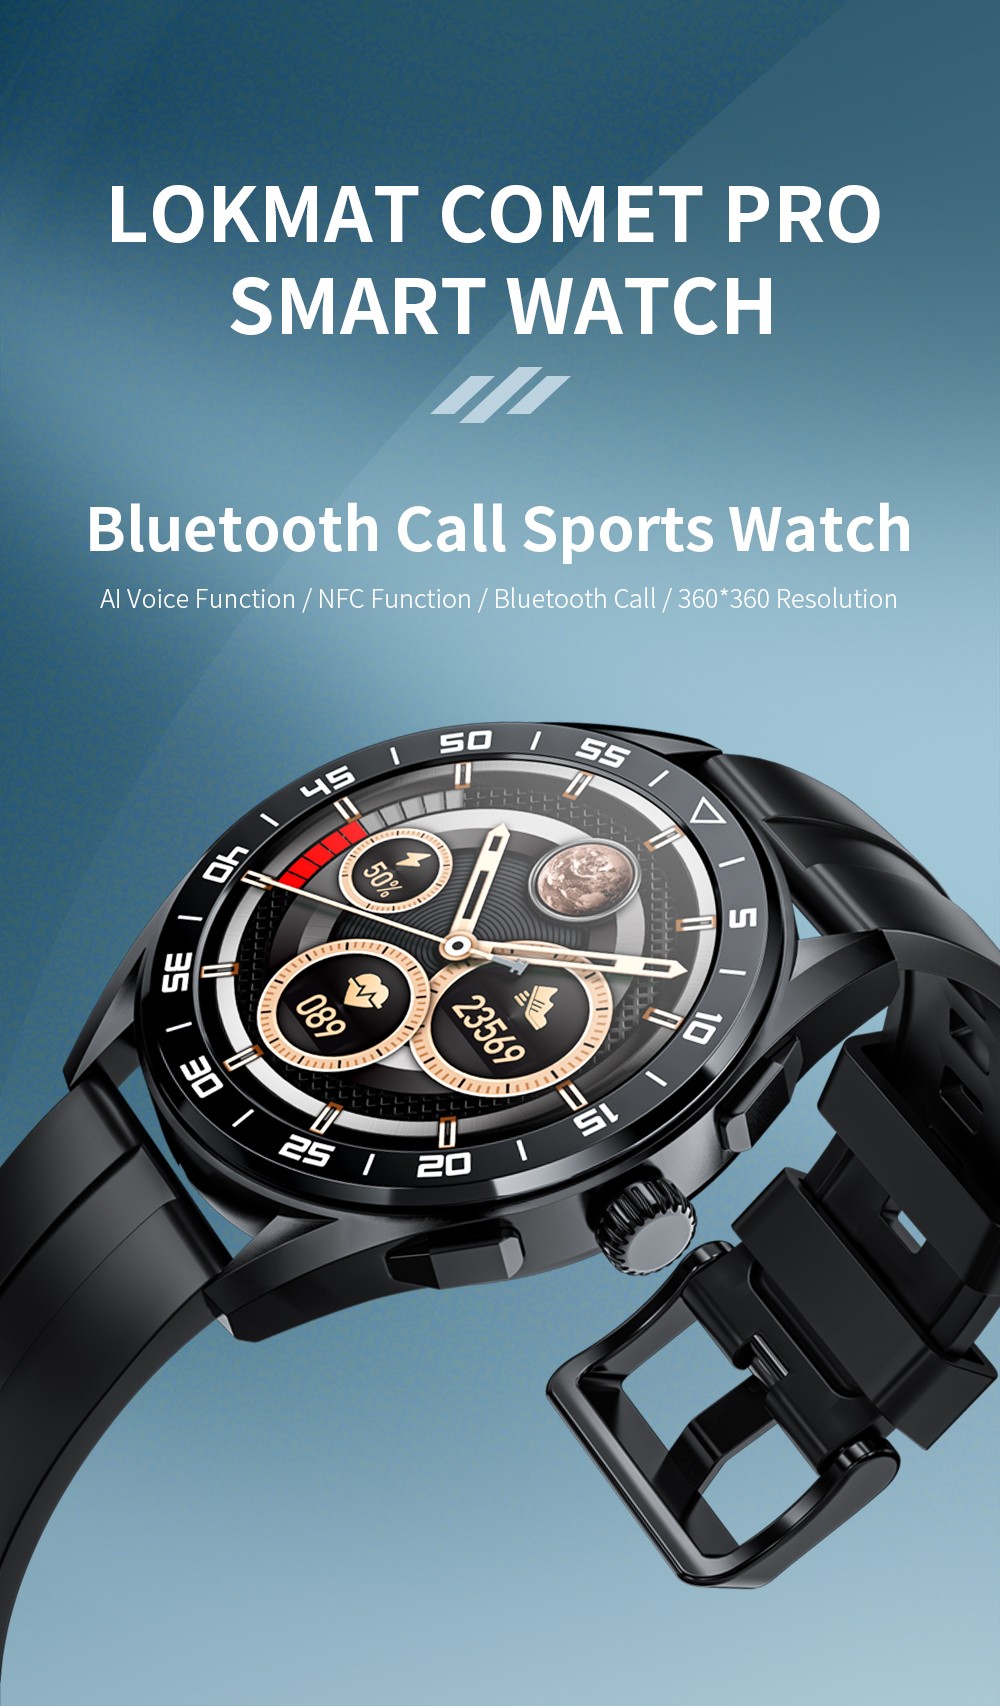 Get LOKMAT COMET PRO Smartwatch Bluetooth Calling Watch 1.32'' Screen for only 30€ with our Coupon on GEEKBUYING